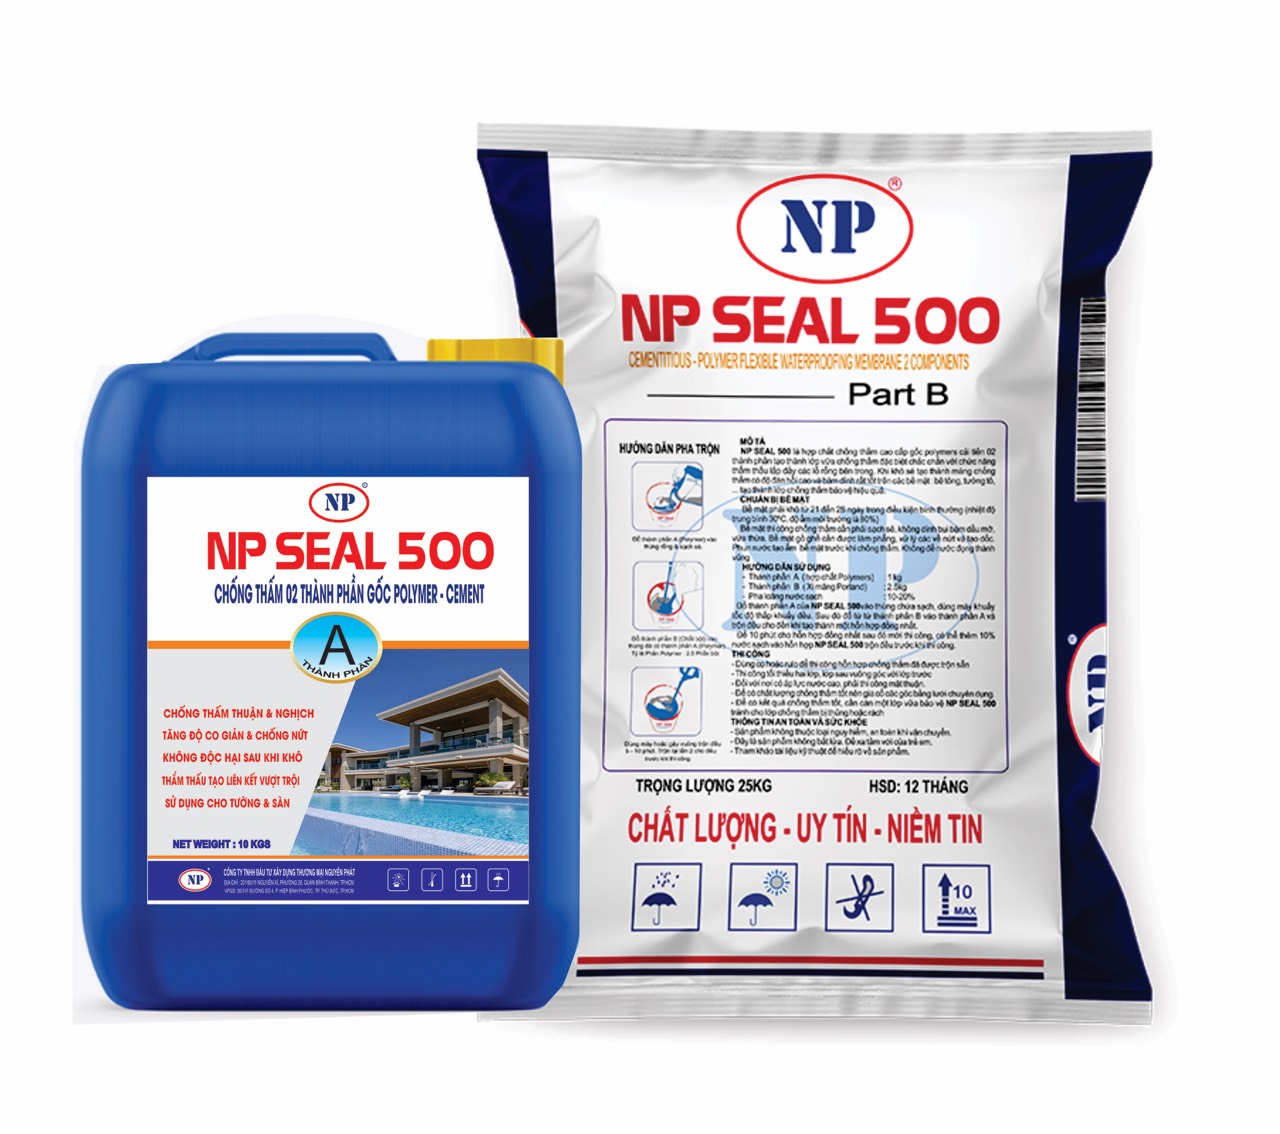 HINH SP NPSEAL500